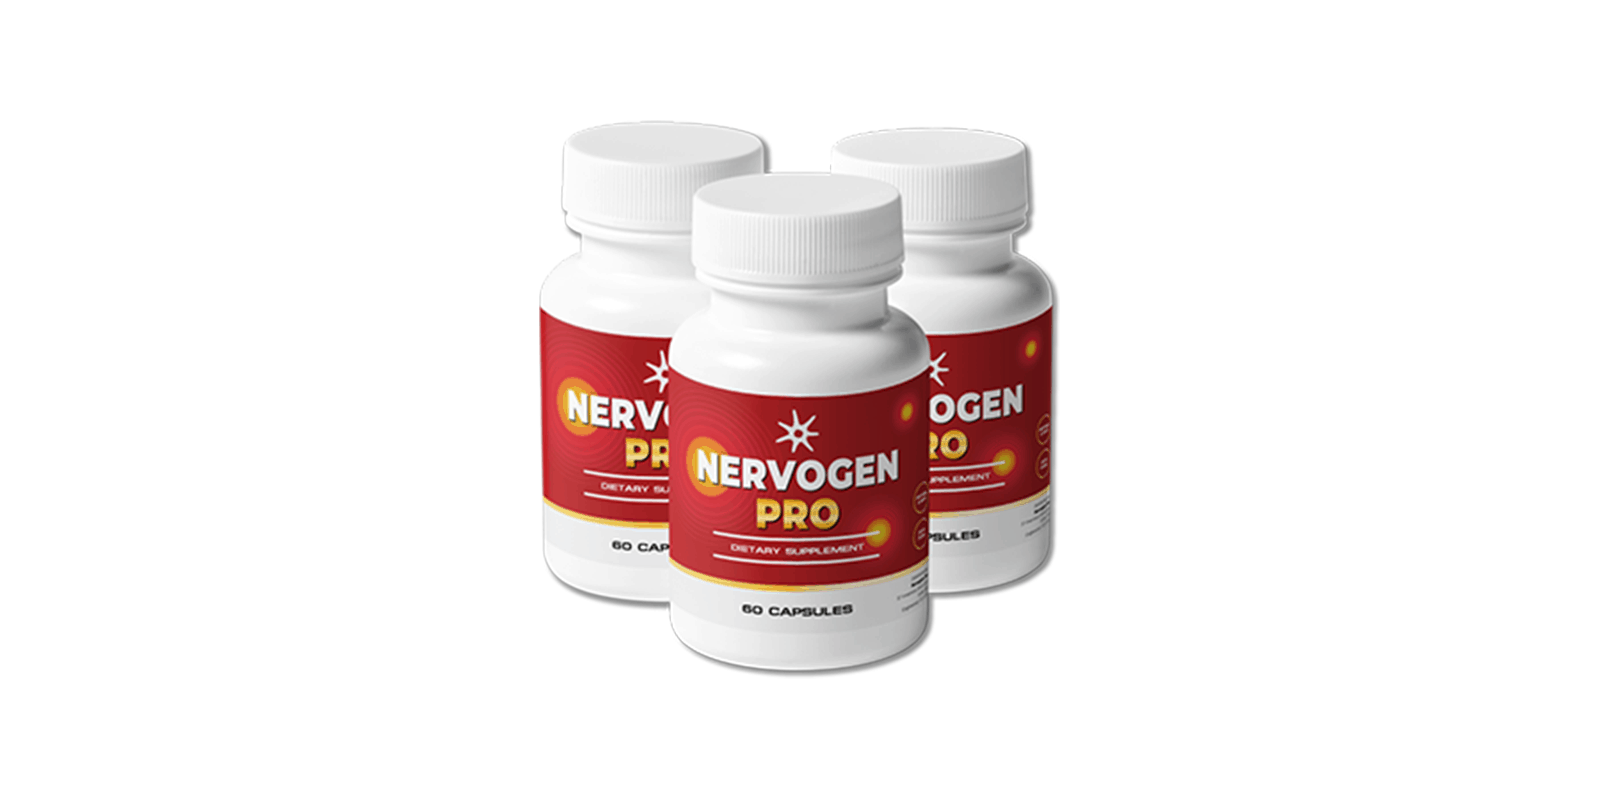 Nervogen PRO Reviews - Is This Dietary Supplement Worthy?